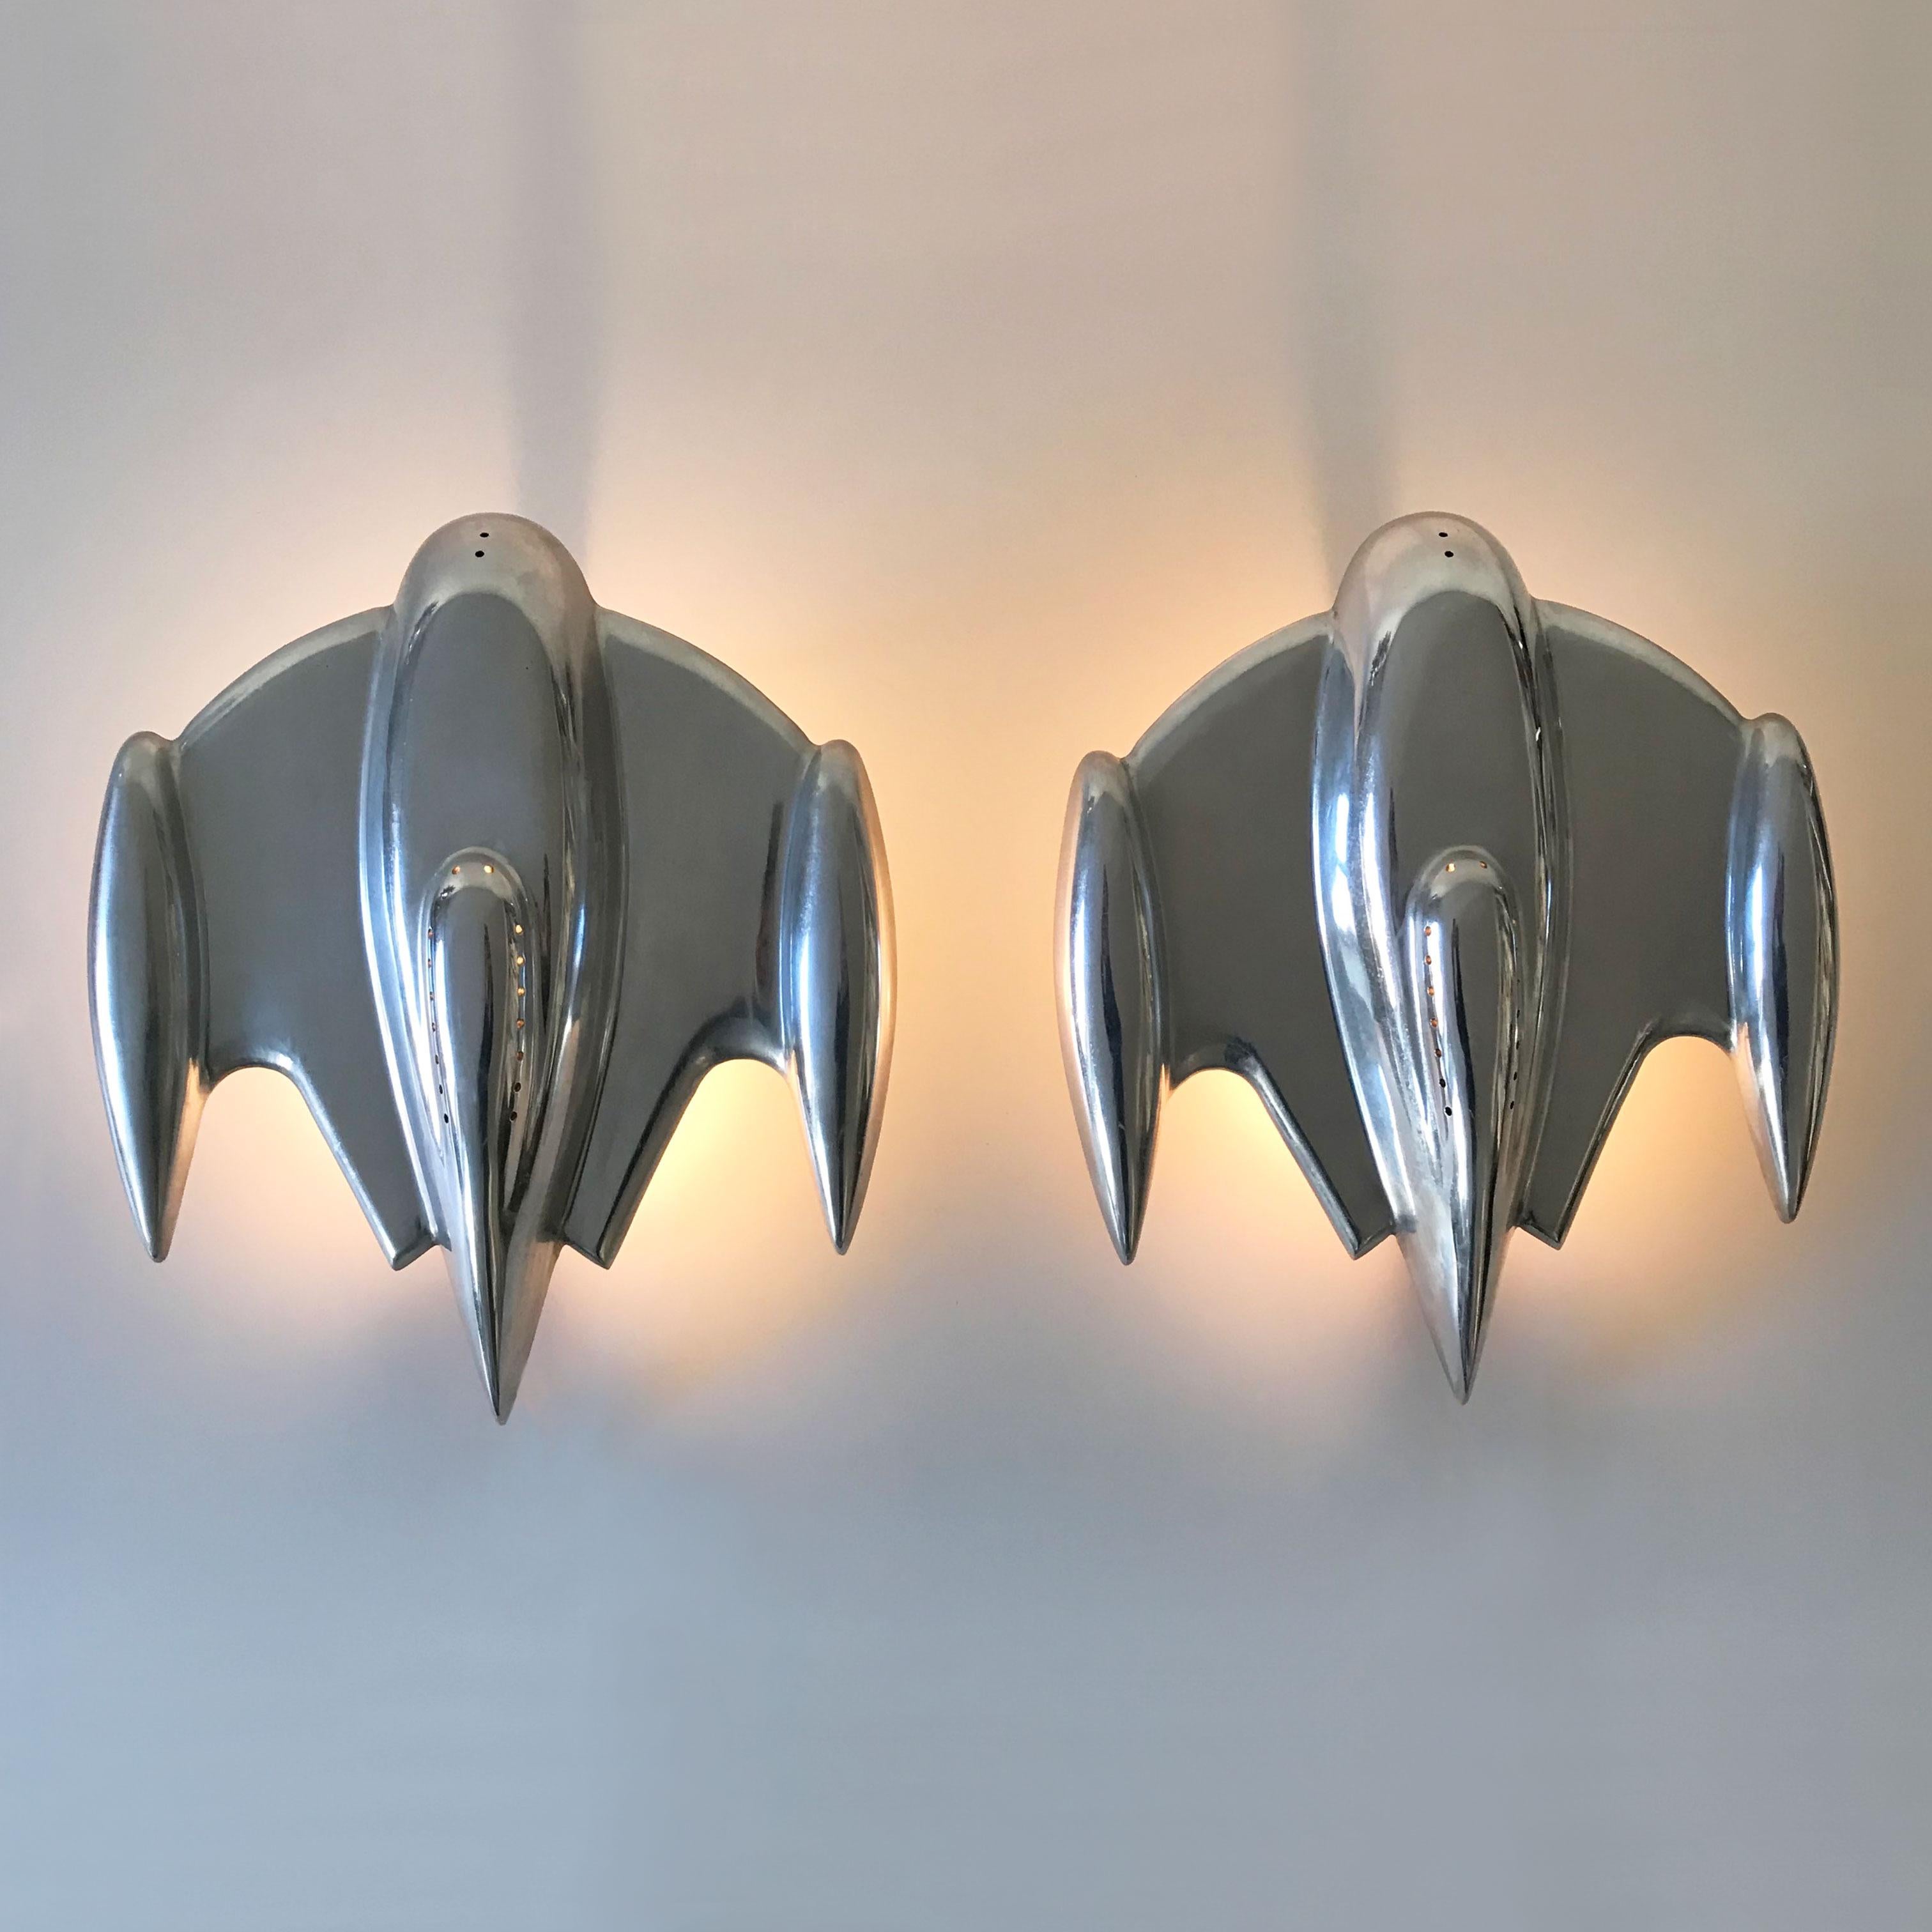 Set of two amazing large Sputnik wall lamps / sconces in shape of spaceships. Probably 1990s, France.

Executed in cast aluminium, each lamp needs 1 x E27 Edison screw fit bulb. Delivery without bulbs. It runs both on 110 / 230 volt.

Dimensions:
H